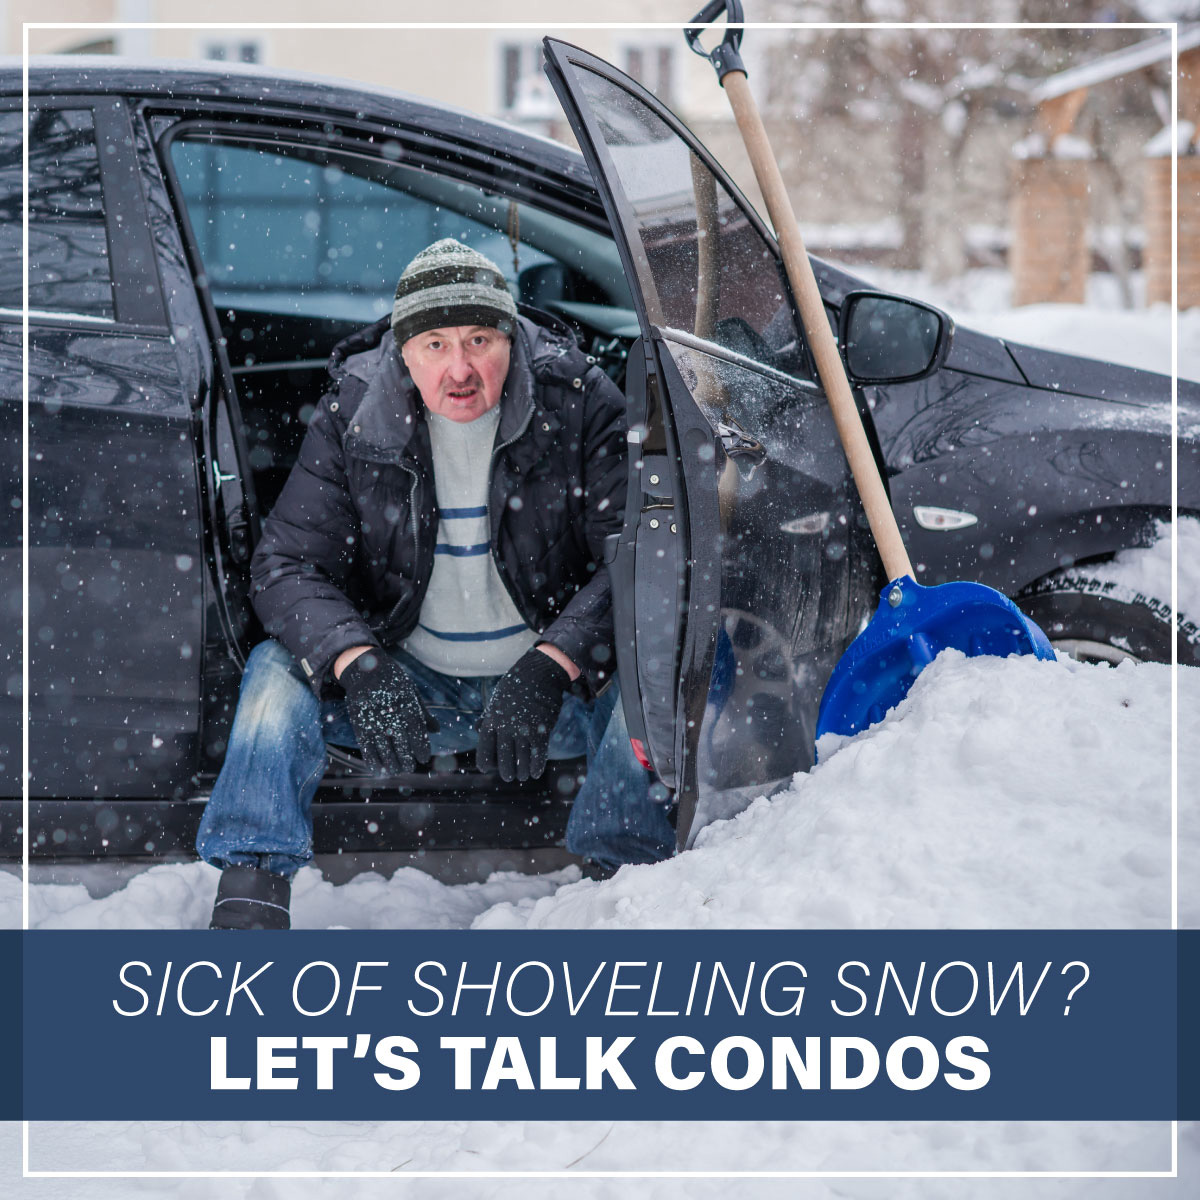 It's already been a long season of raking leaves. Who wants to spend the next season shoveling snow?! If this sounds like you, take the step toward buying a condo where the heavy lifting is done for you. Chat with us today to learn more. #condobuyers #condopurchase #mortgageloan